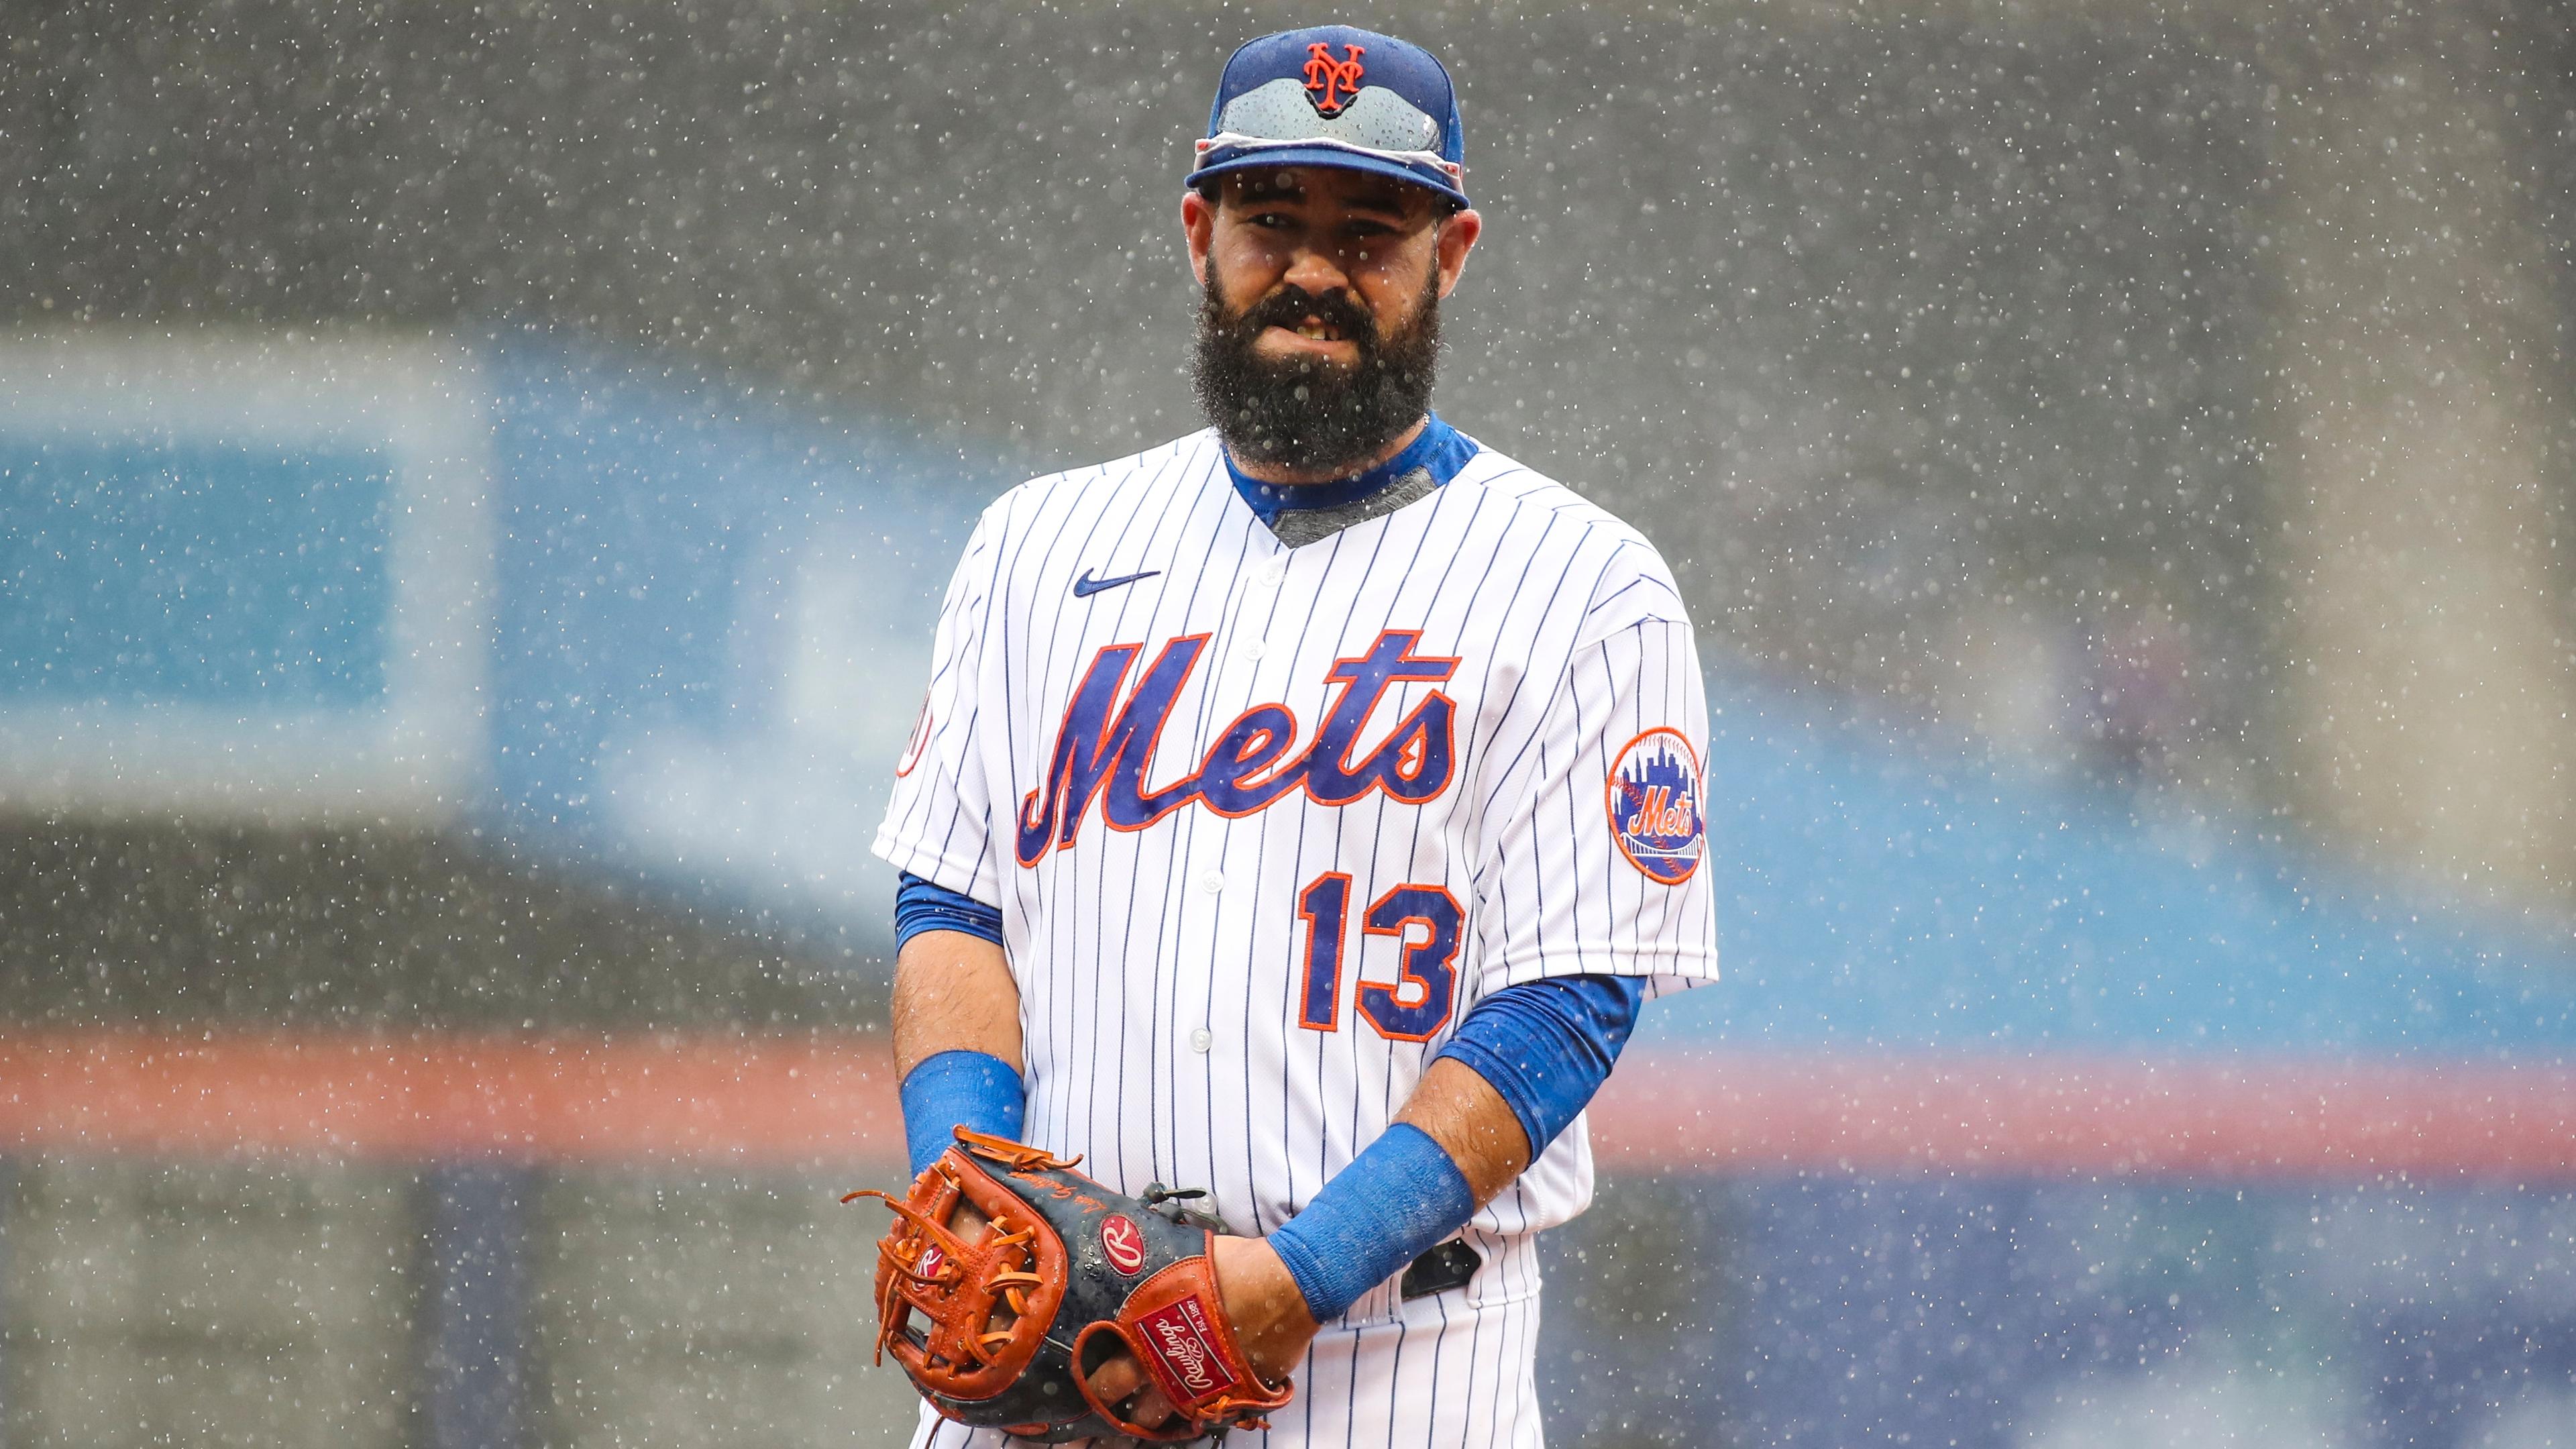 New York Mets third baseman Luis Guillorme (13) takes the field in the top of the first inning against the Miami Marlins prior to the rain delay at Citi Field. / Wendell Cruz-USA TODAY Sports